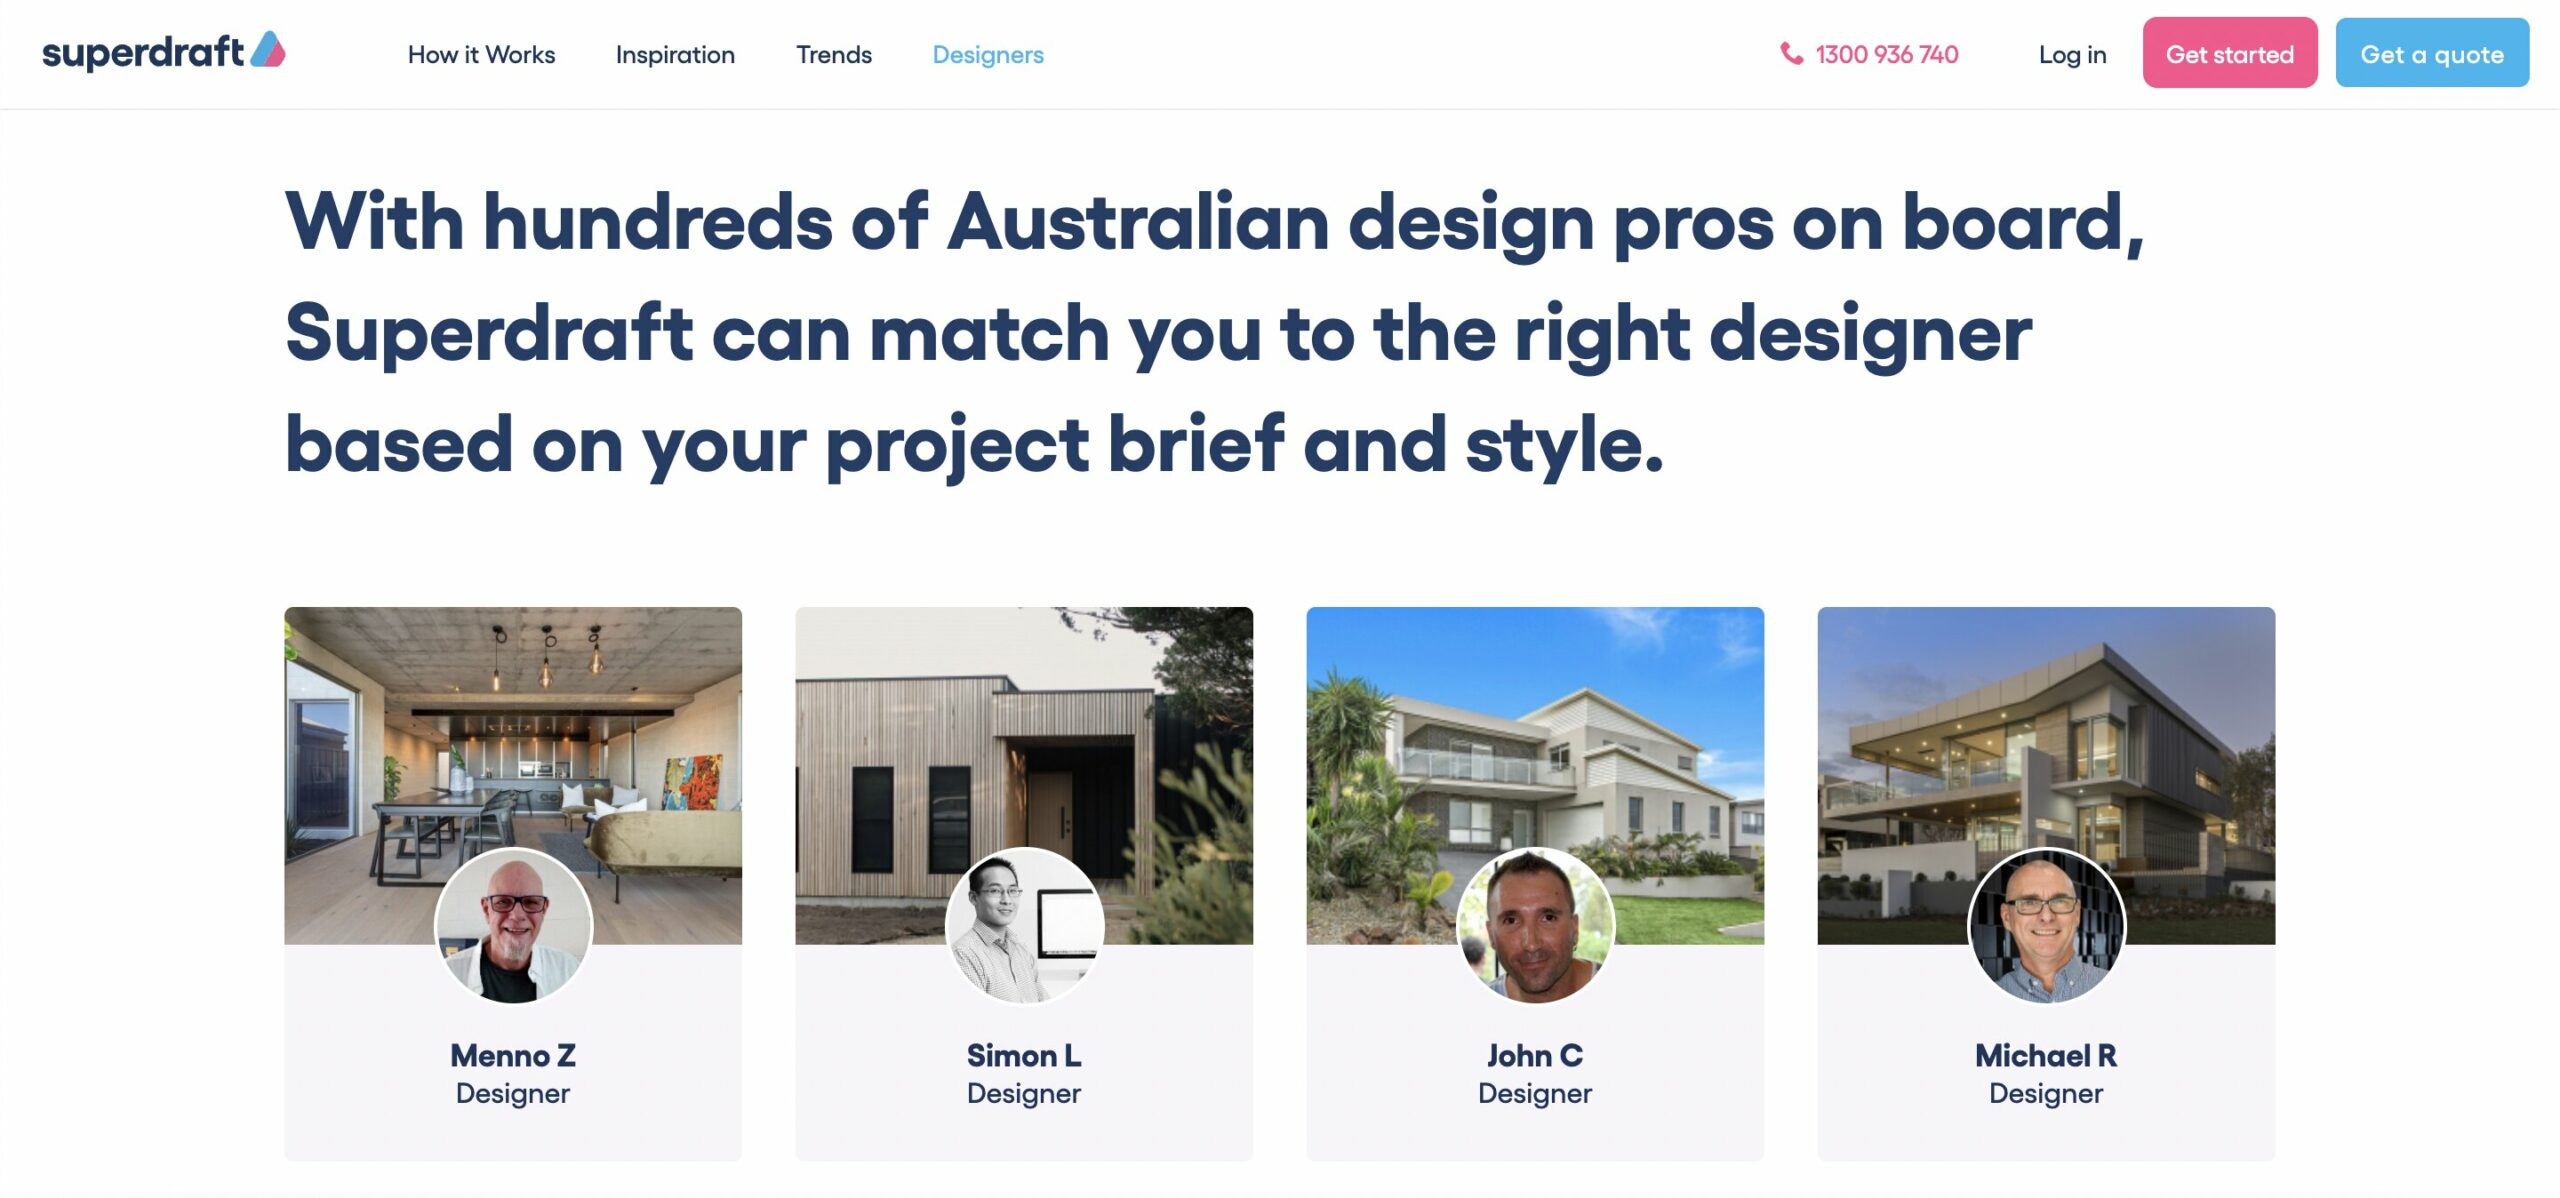 hire the right designers for your project